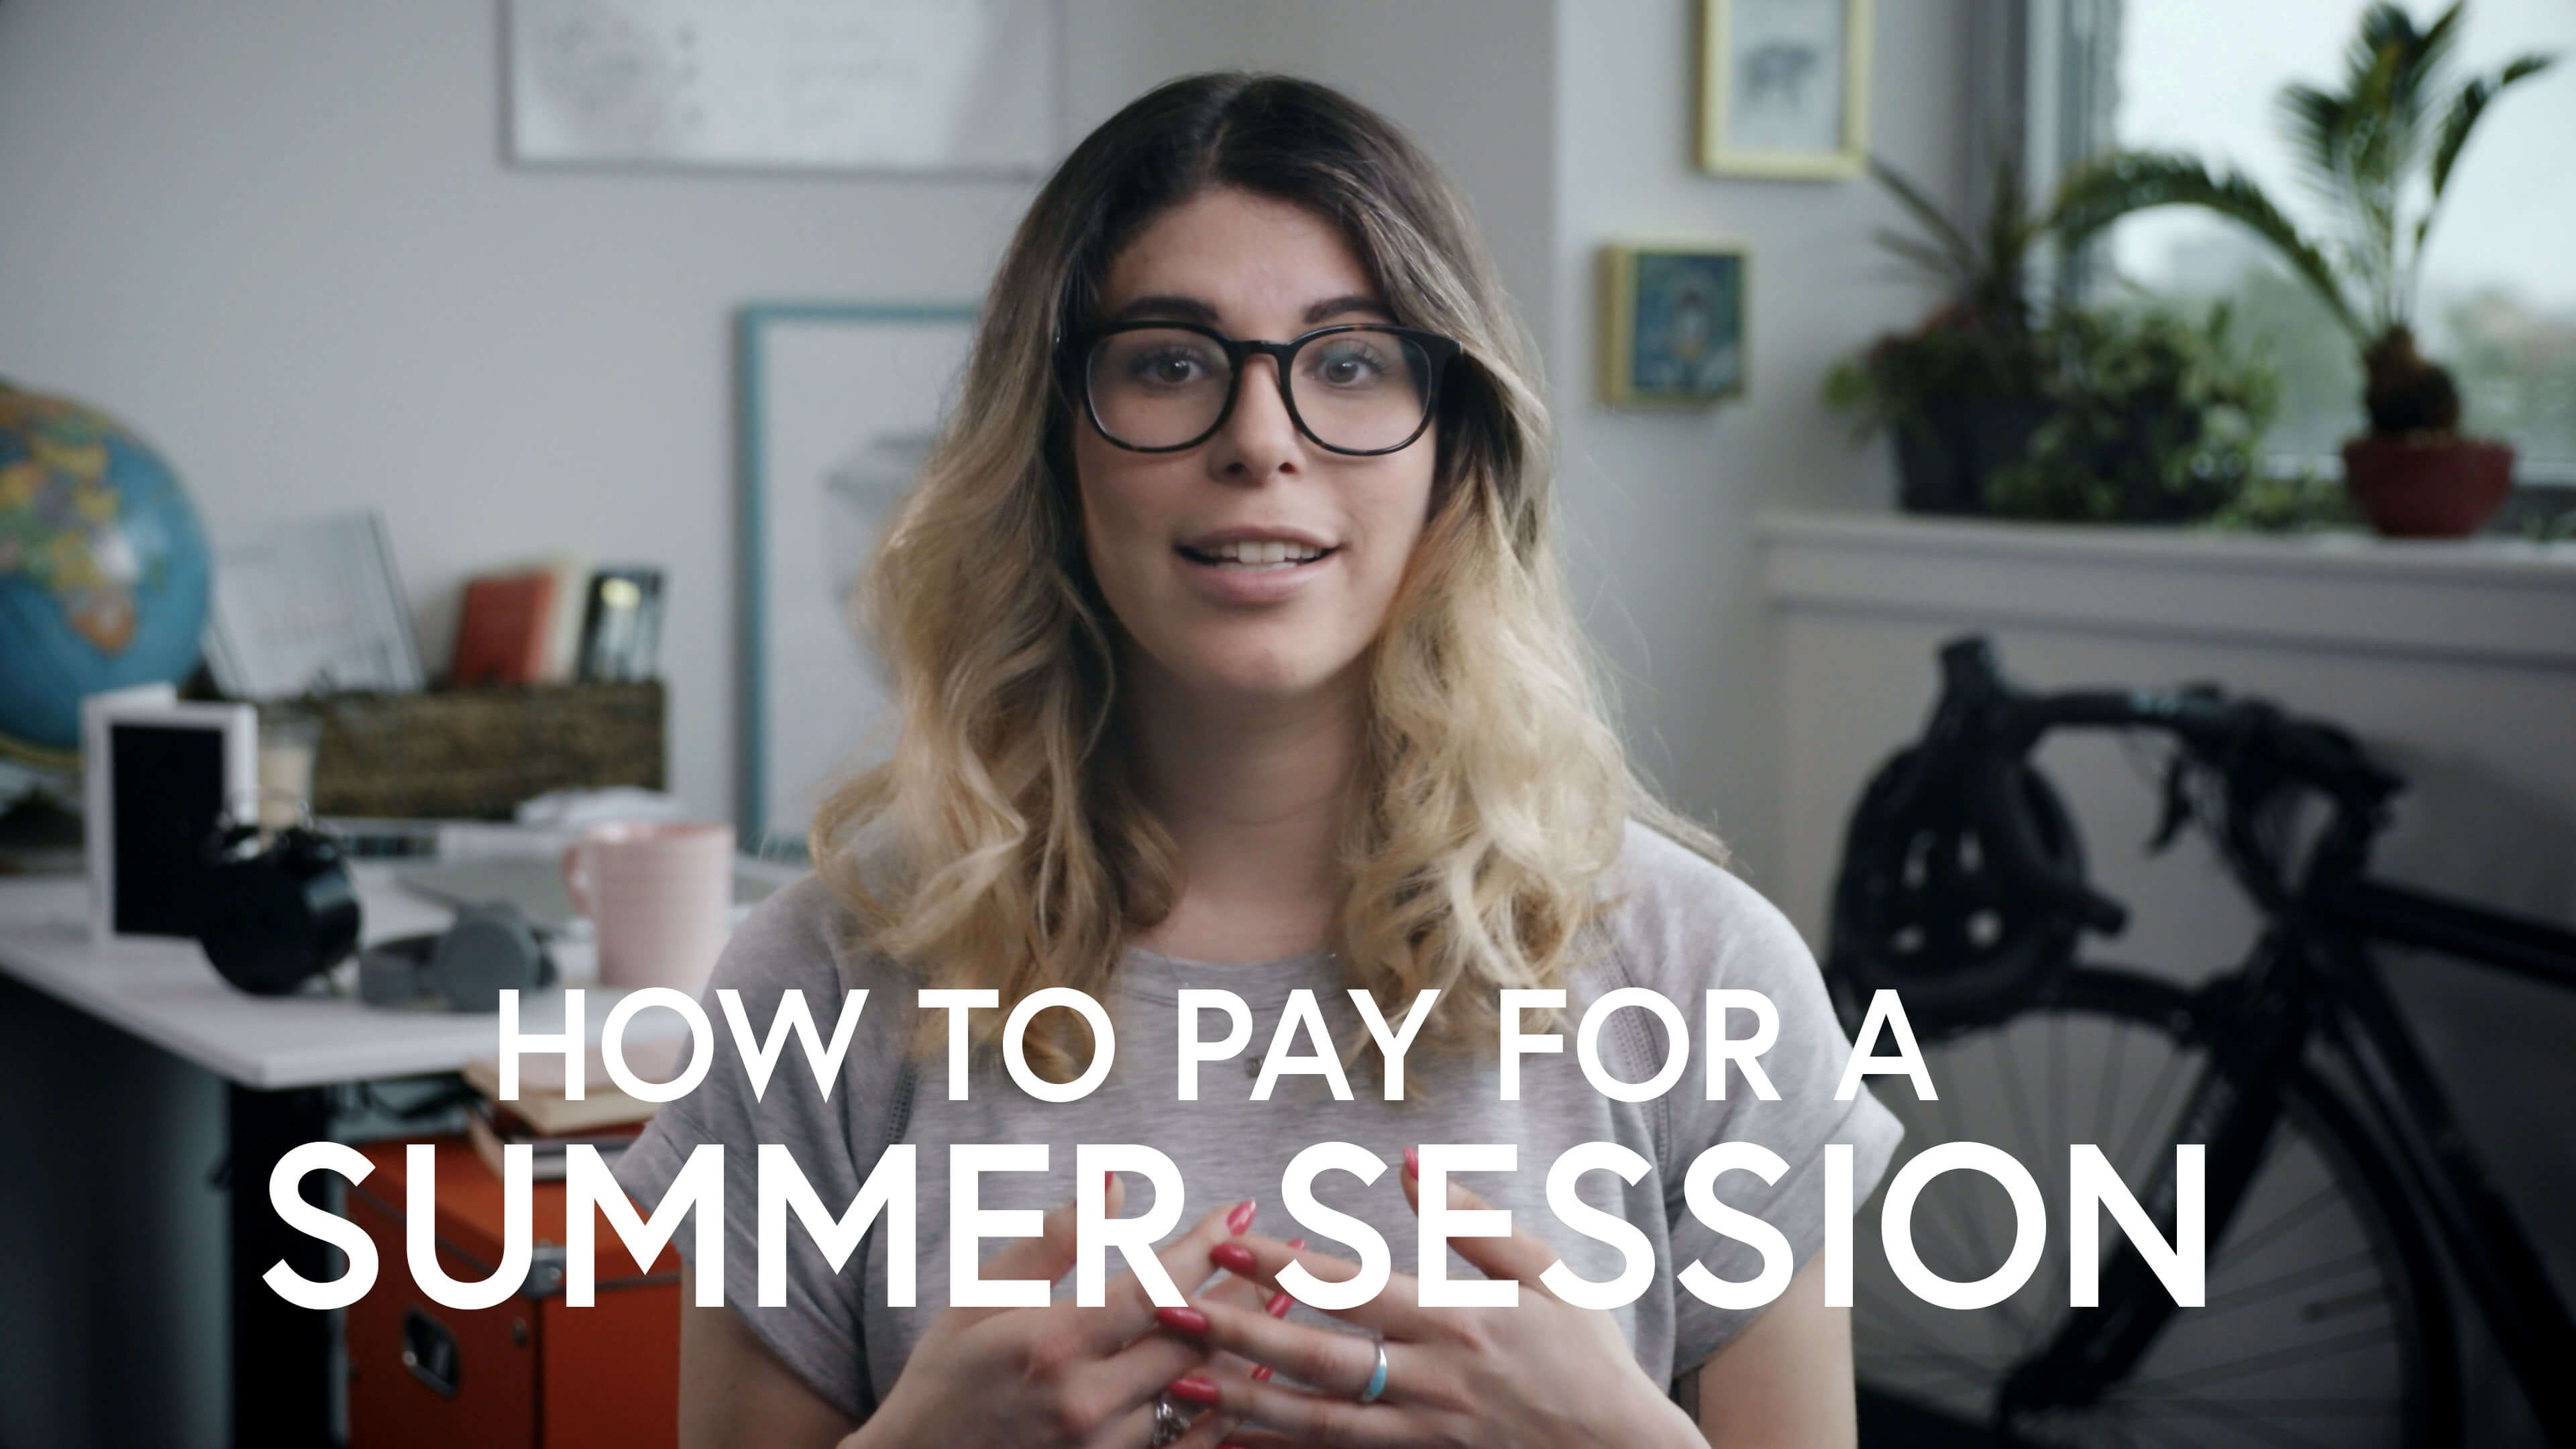 How to pay for a summer session